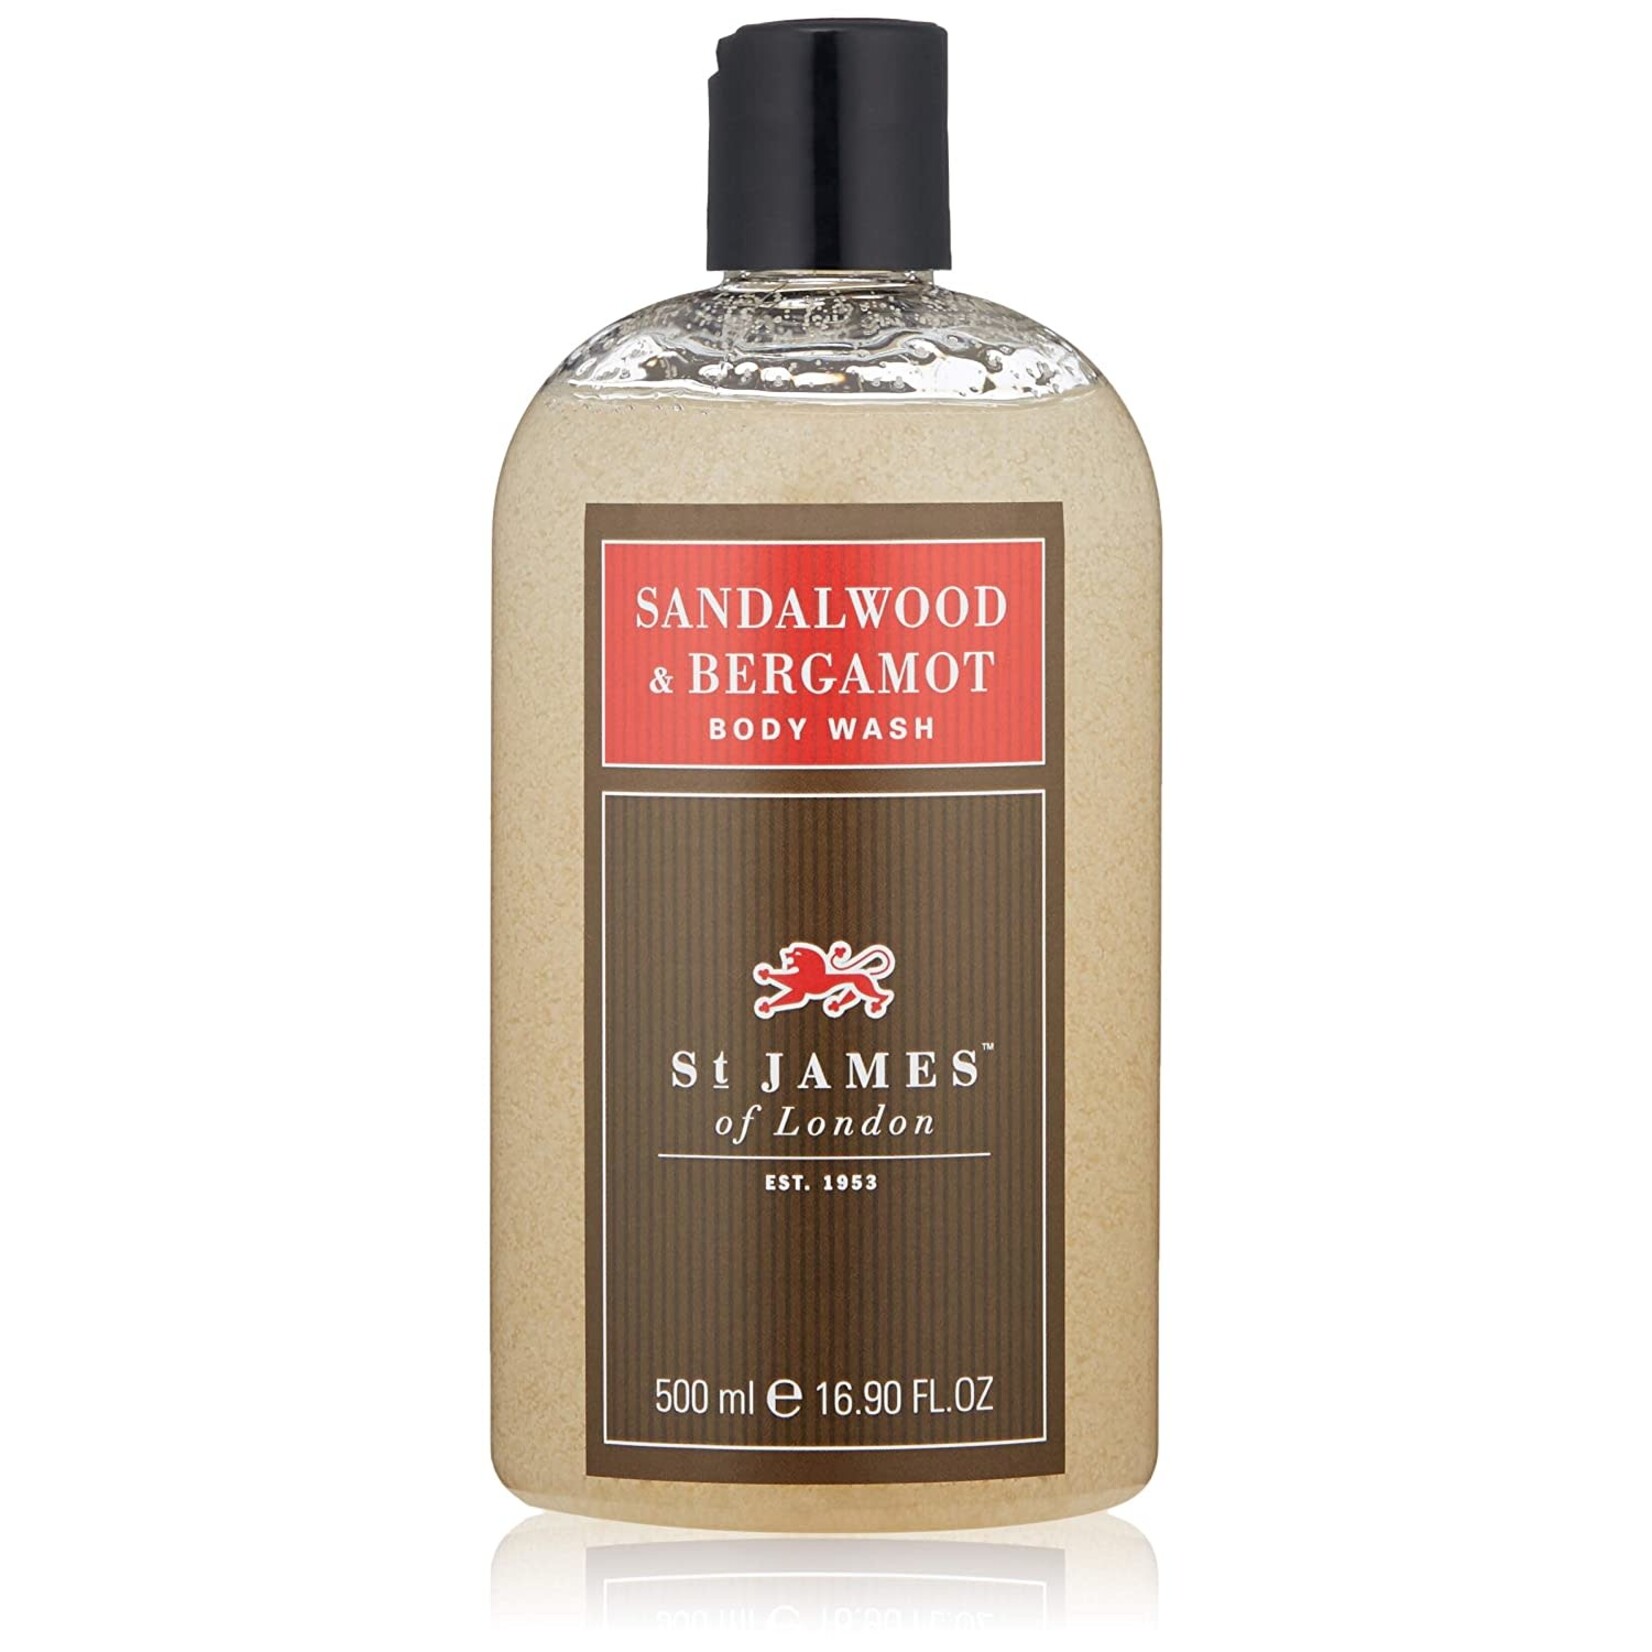 St. James of London St. James Body Wash